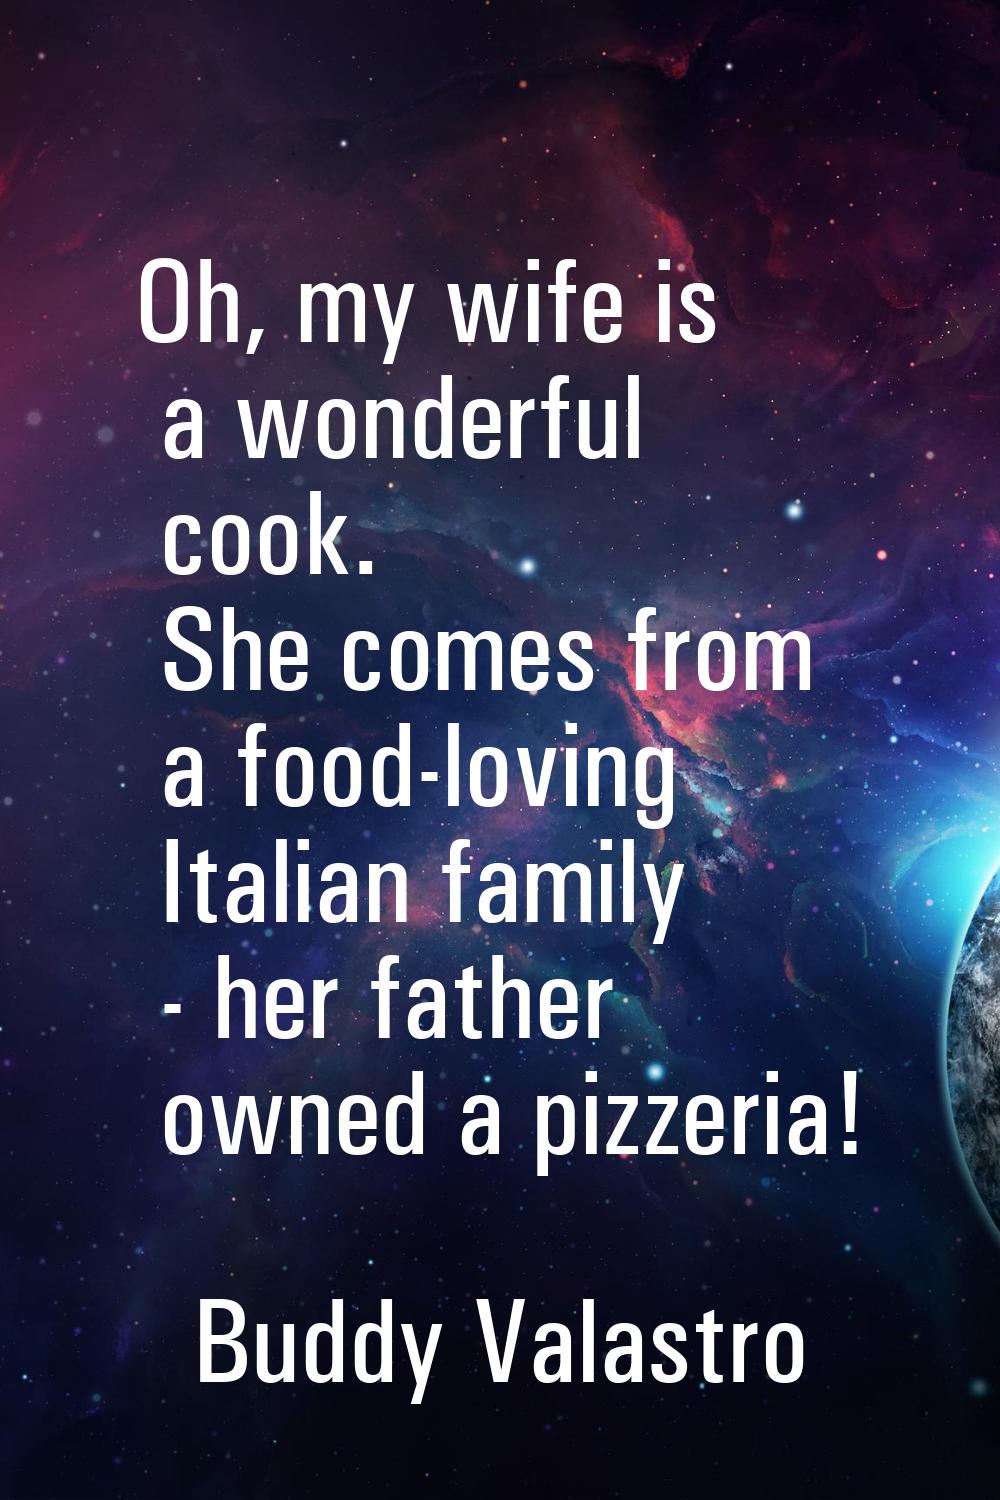 Oh, my wife is a wonderful cook. She comes from a food-loving Italian family - her father owned a p